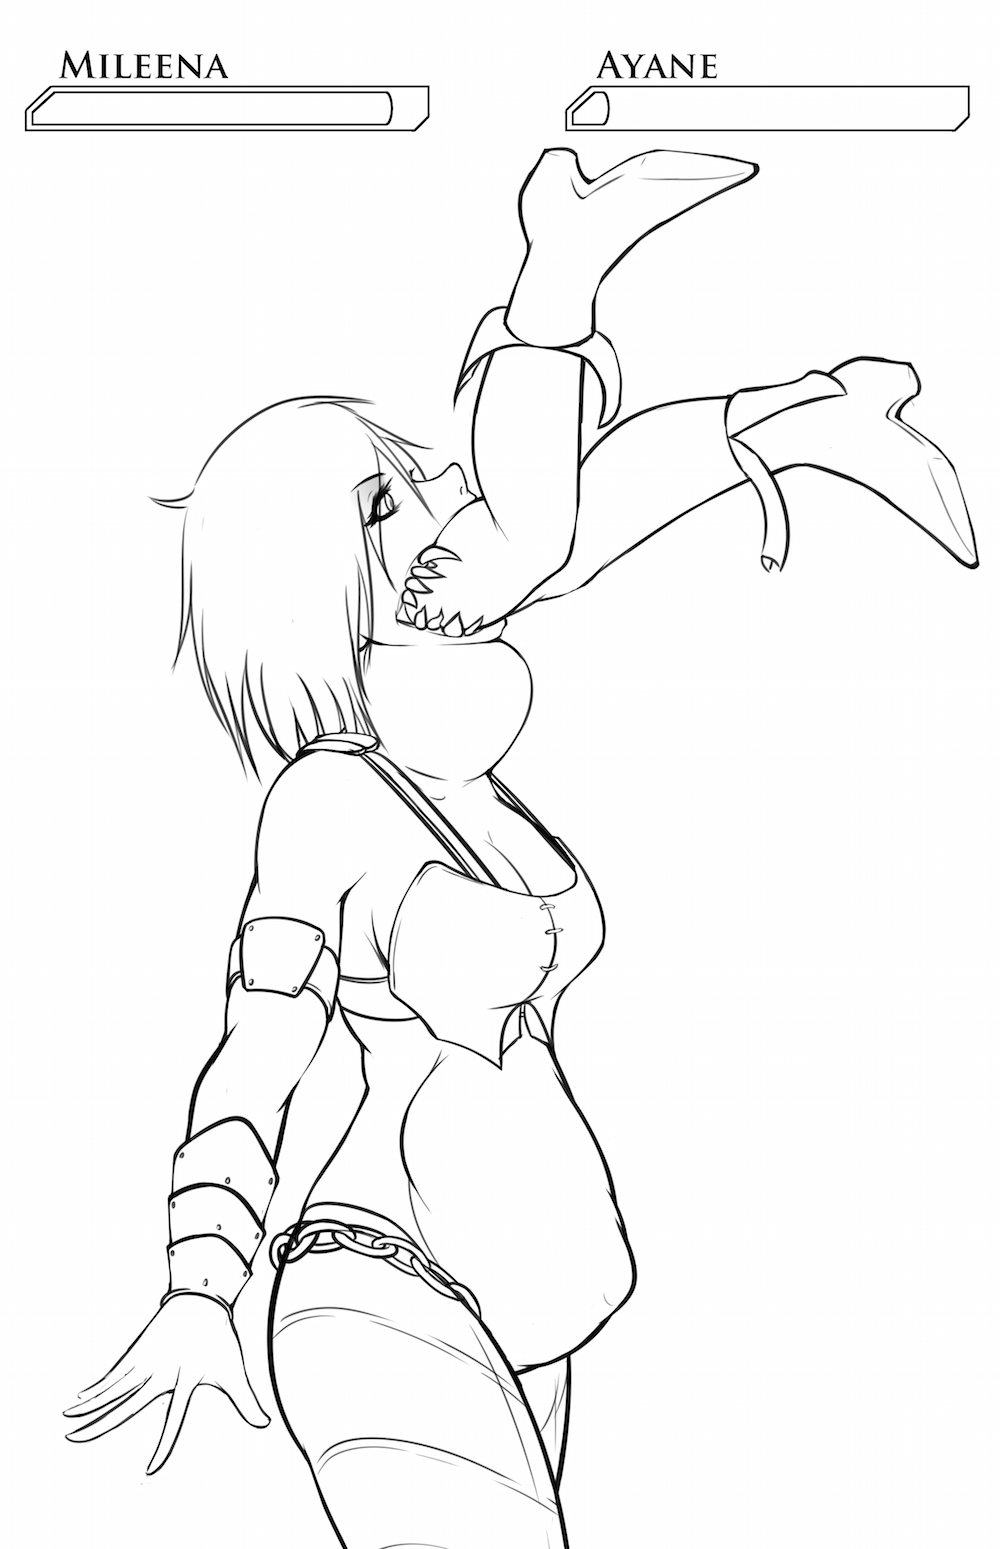 Patreon Sketch 6/6Finish Her! Mileena making a quick snack out of Ayane from Dead